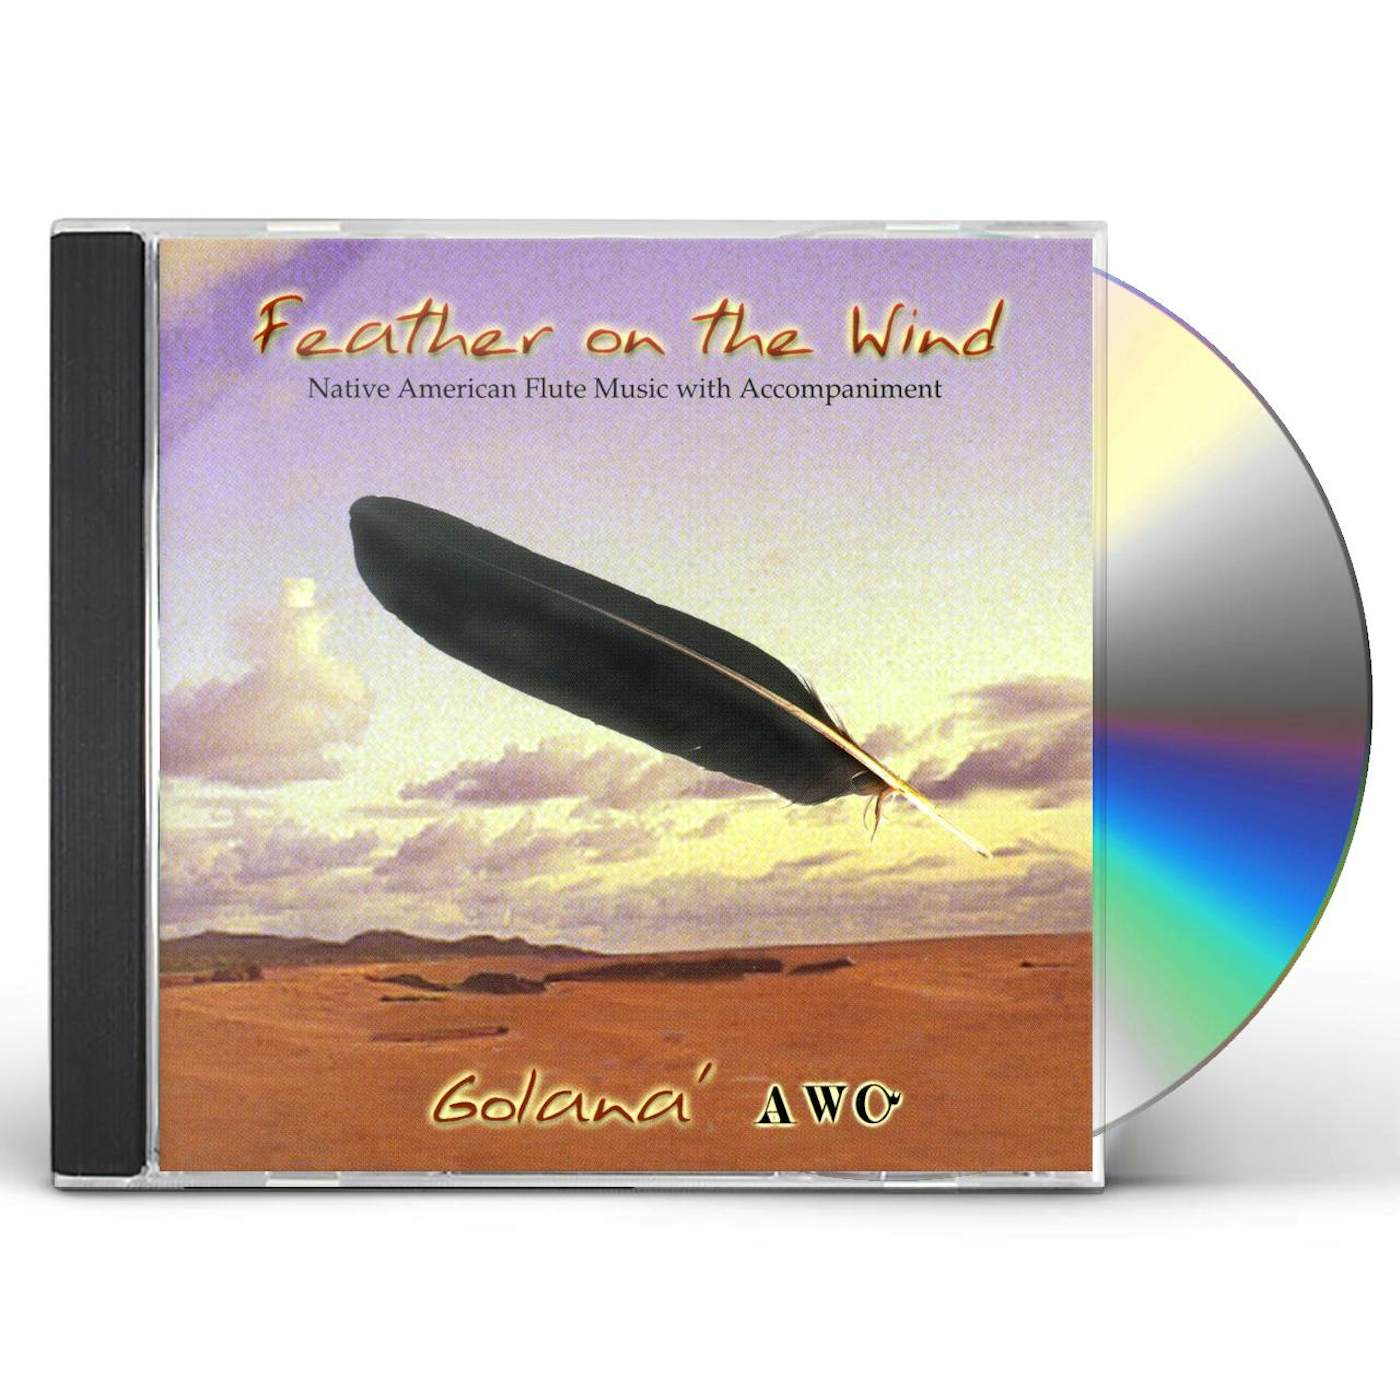 Golana FEATHER ON THE WIND CD